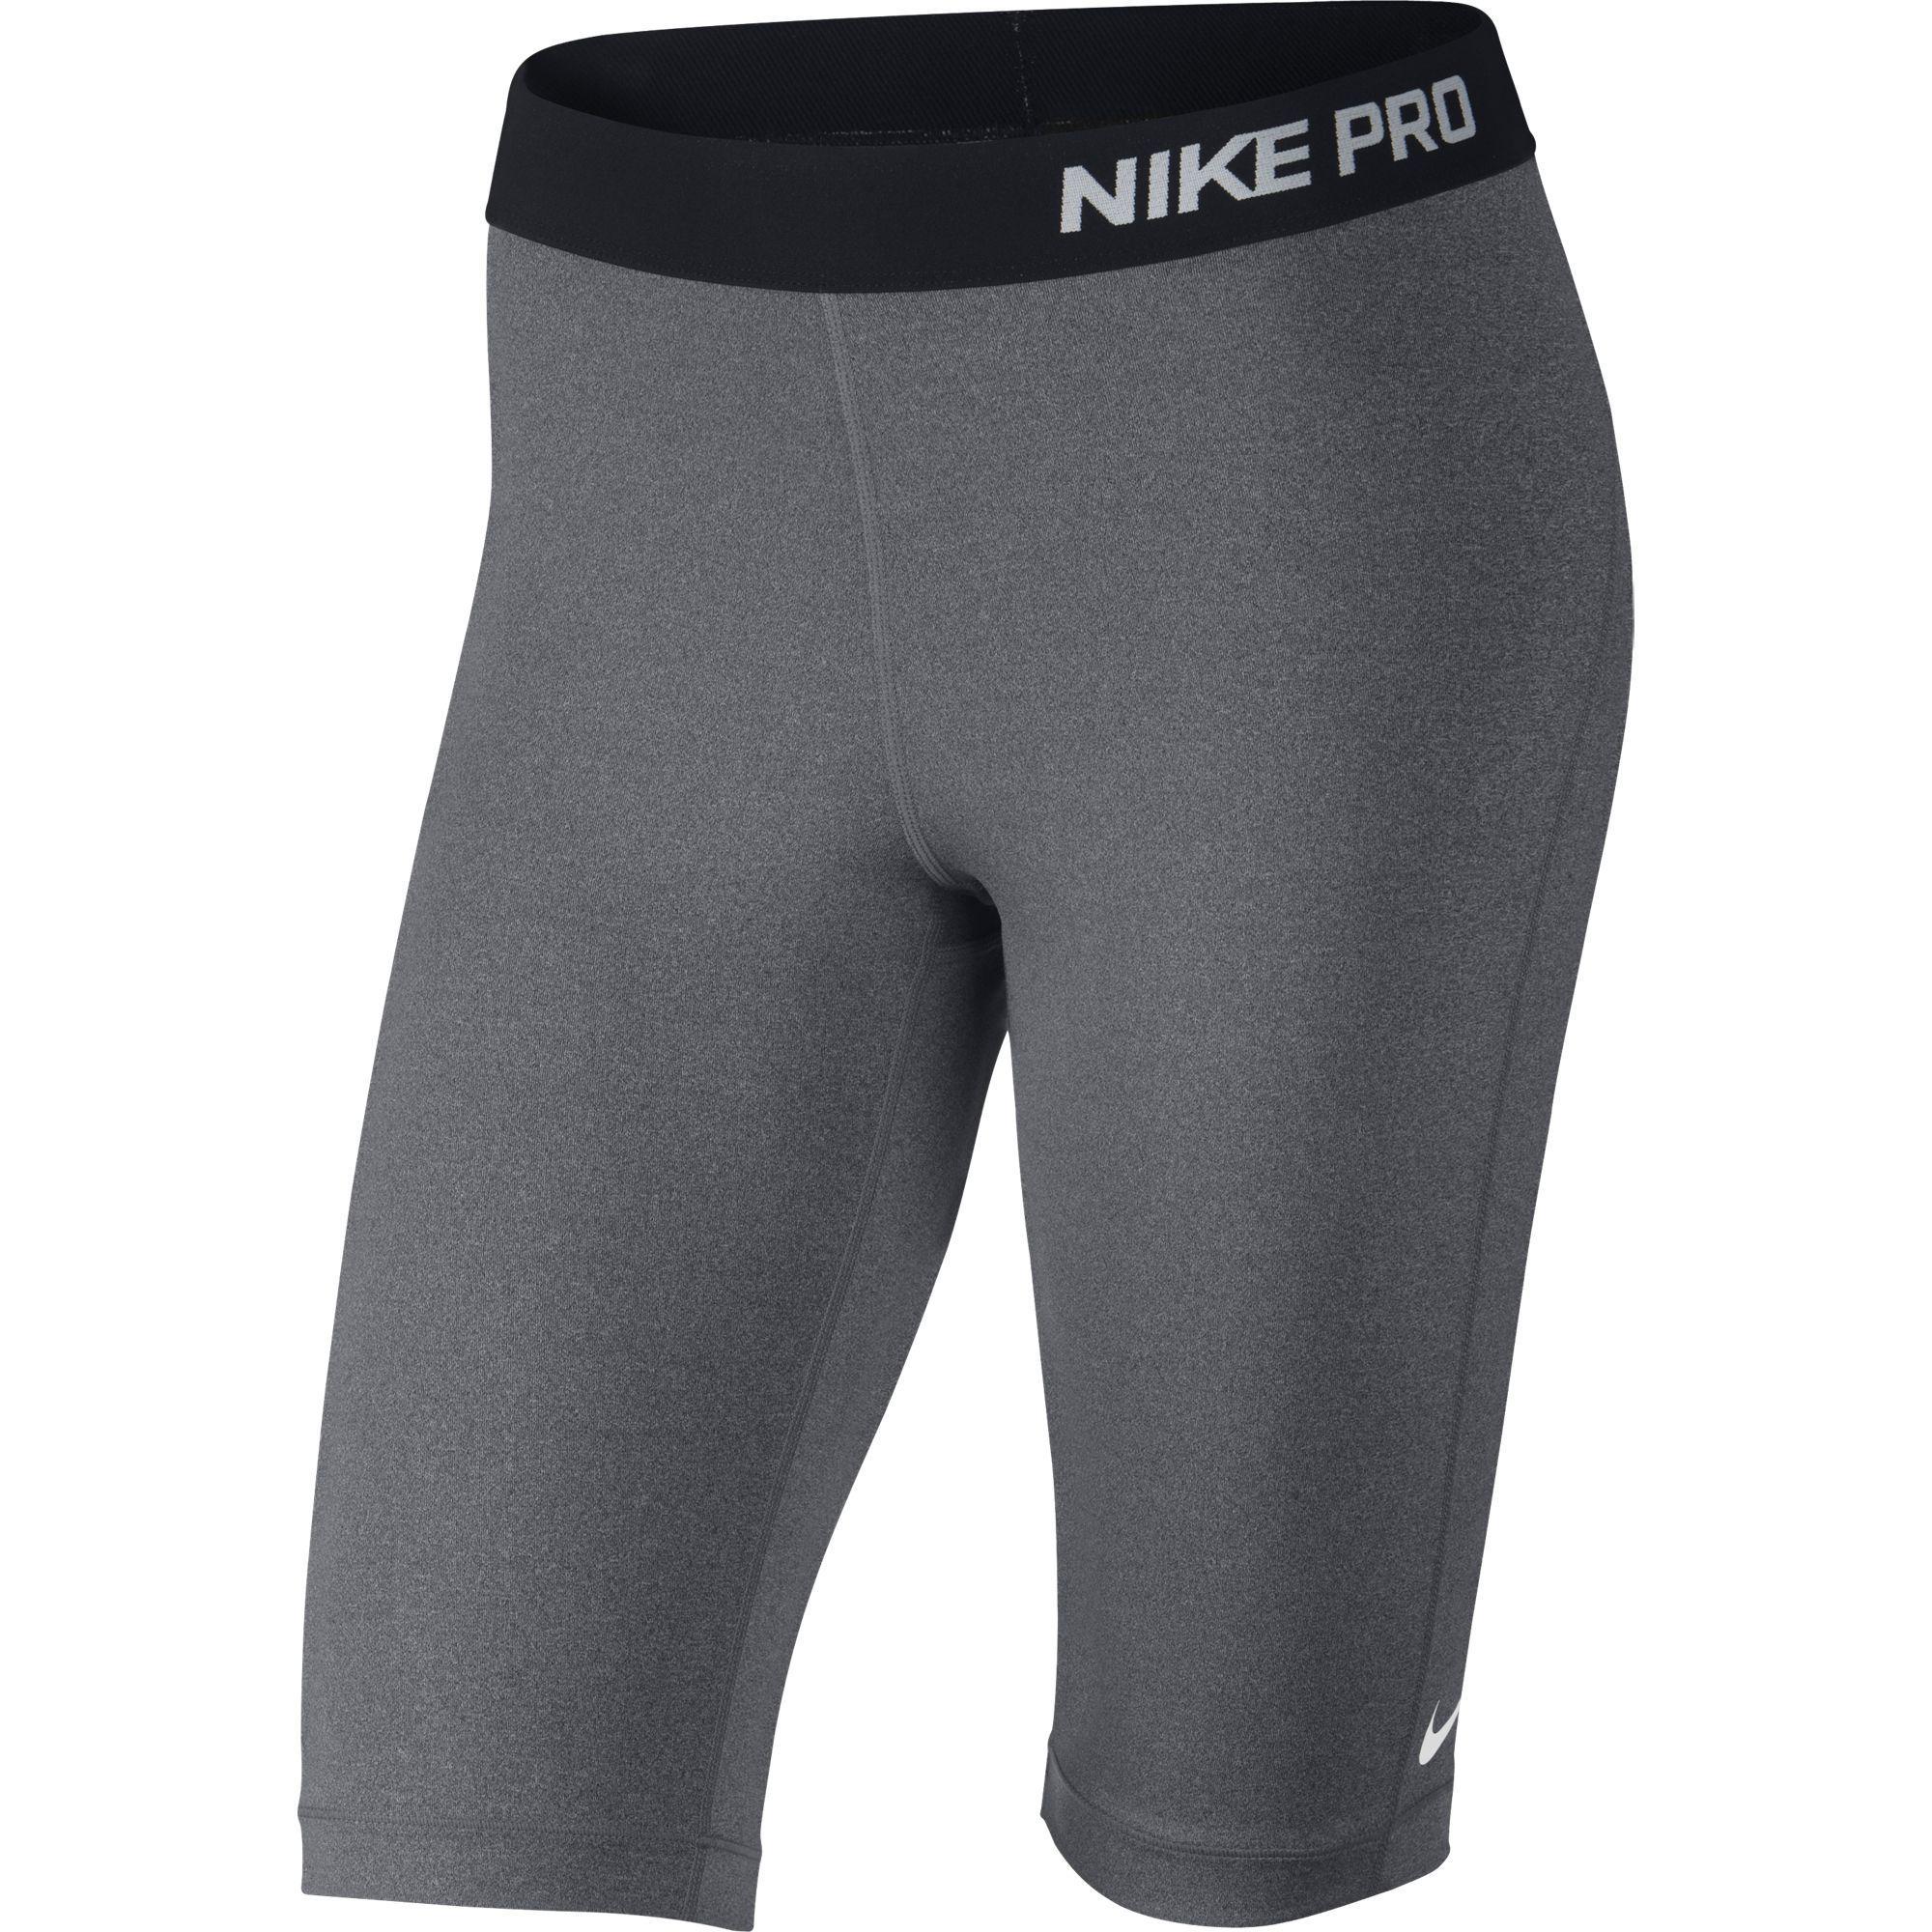 Nike Pro 11 Inch Womens Base Layer Shorts - Carbon Heather Grey ...